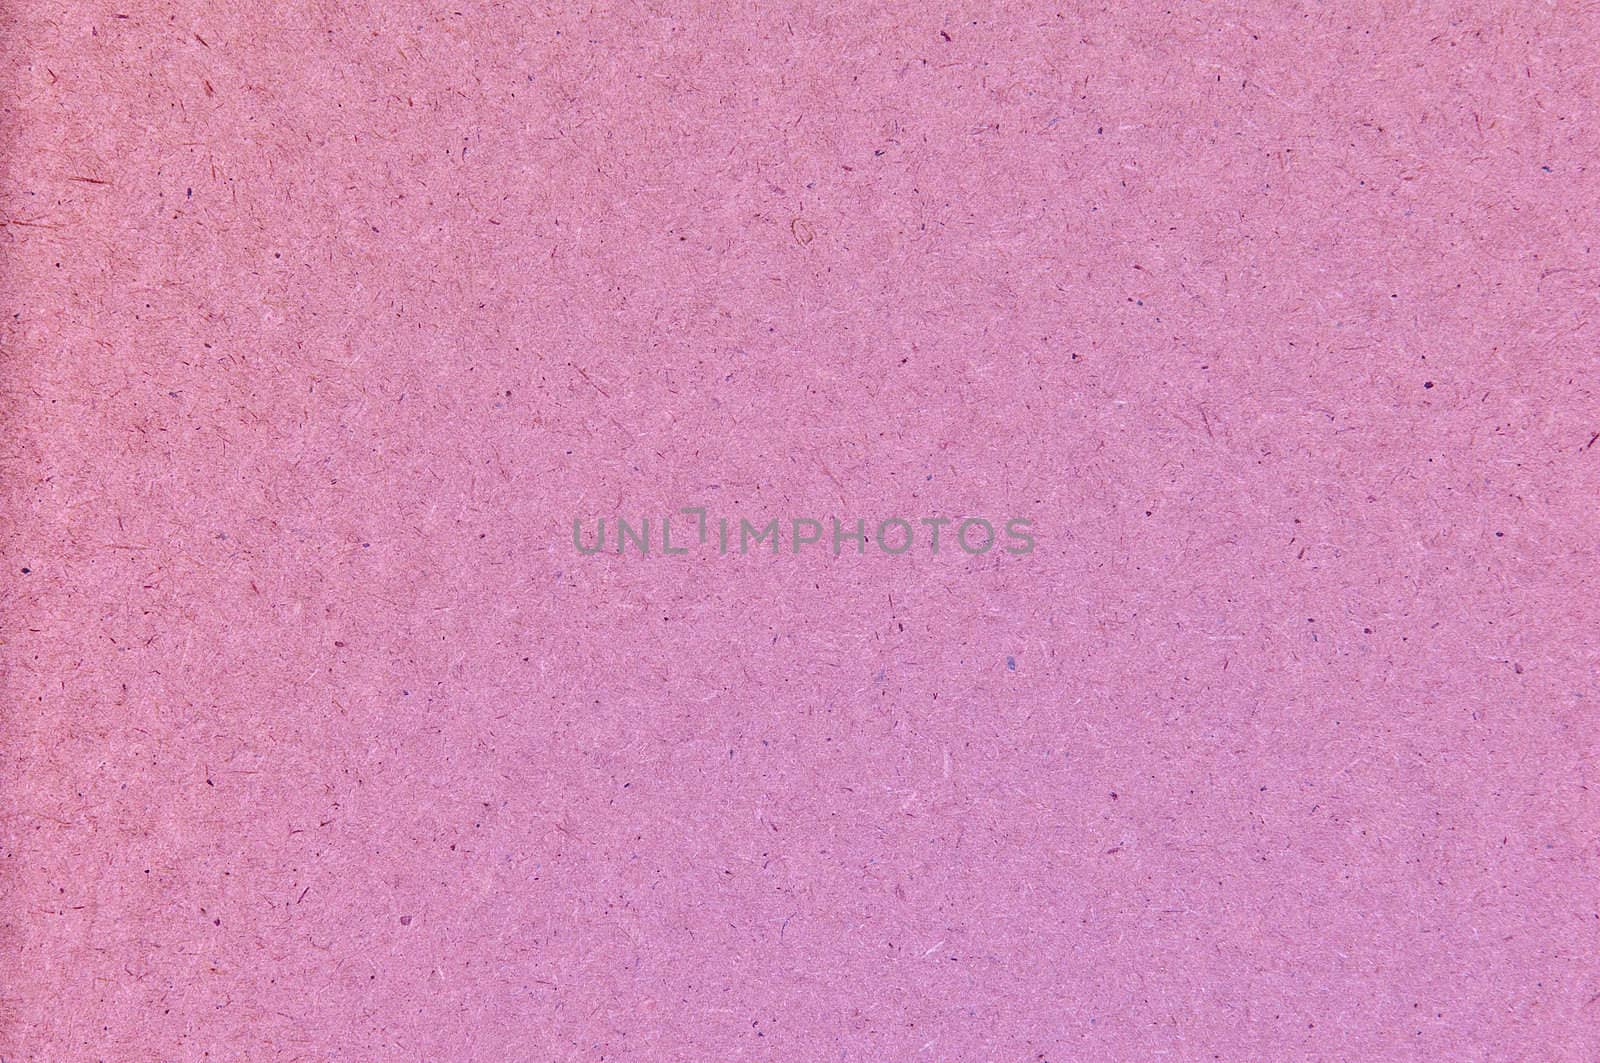 Background a texture. The old scratched cardboard in style grunge, pink color